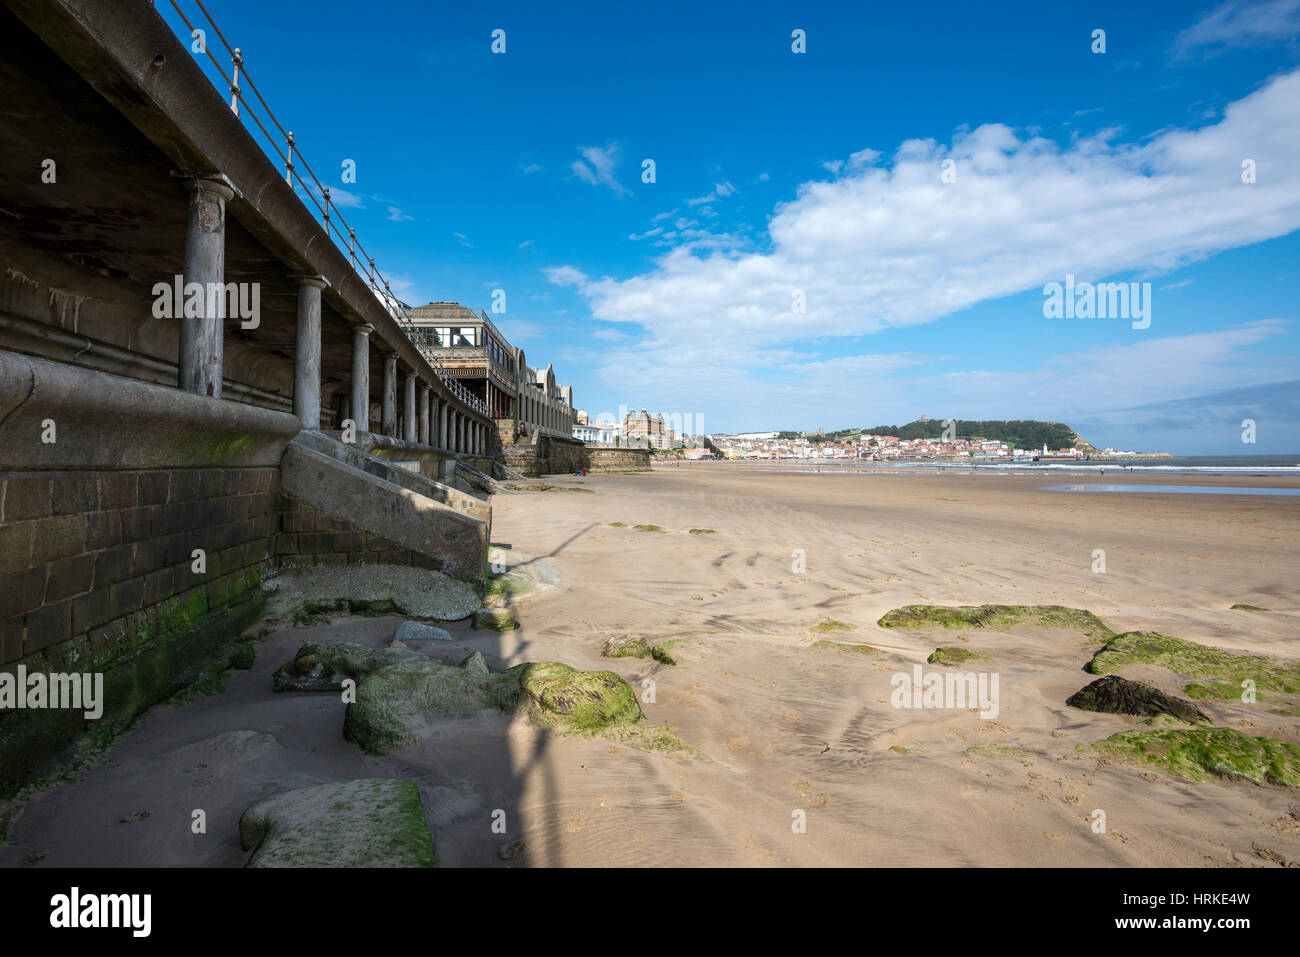 Old buildings at Scarbough, an historic seaside town on the coast of North Yorkshire, England. Stock Photo